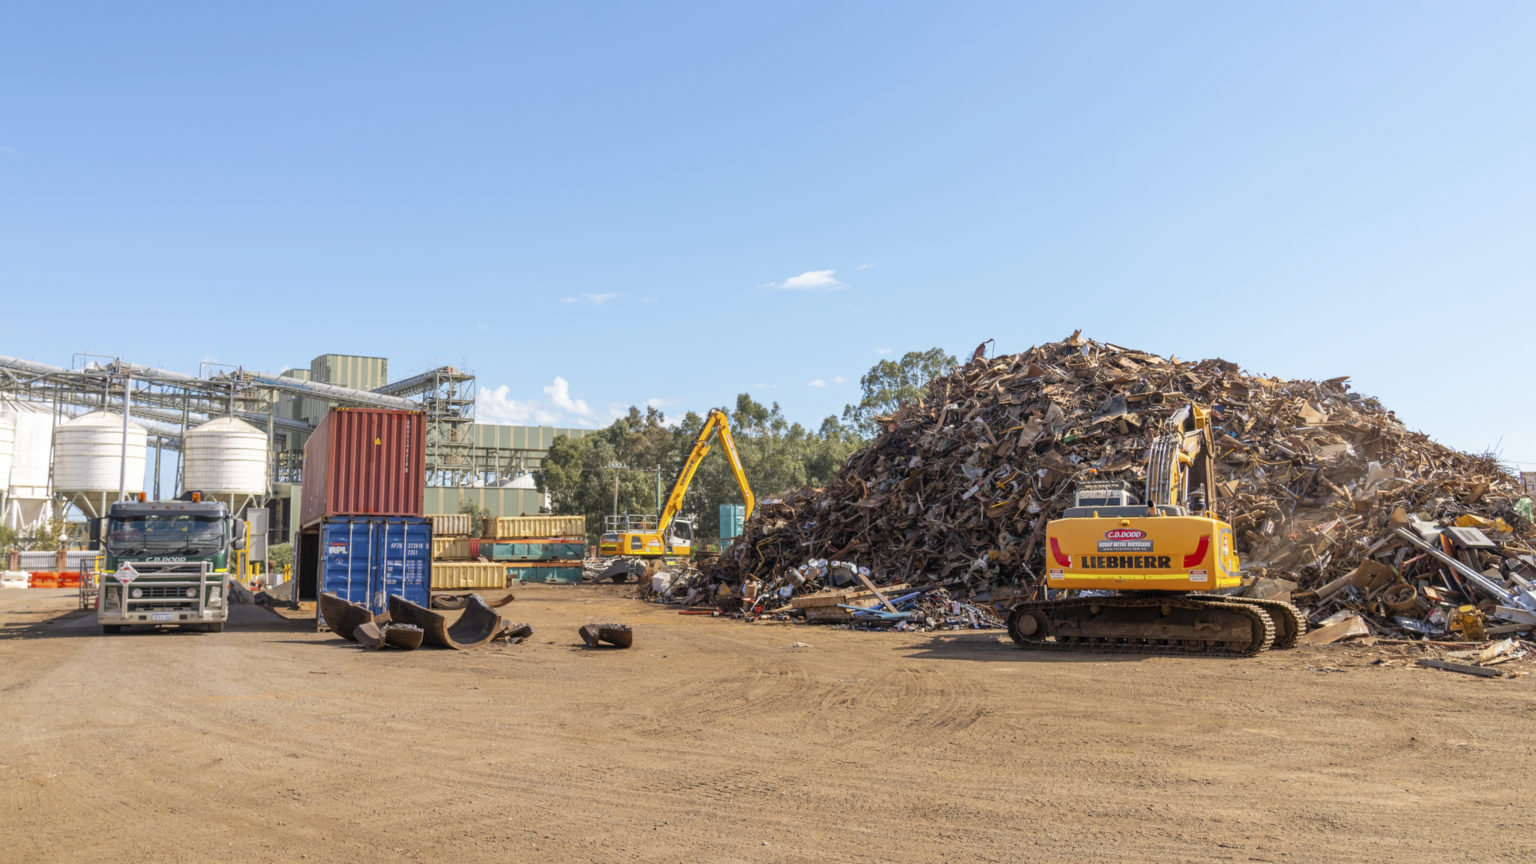 What Can Scrap Metal Be Recycled Into